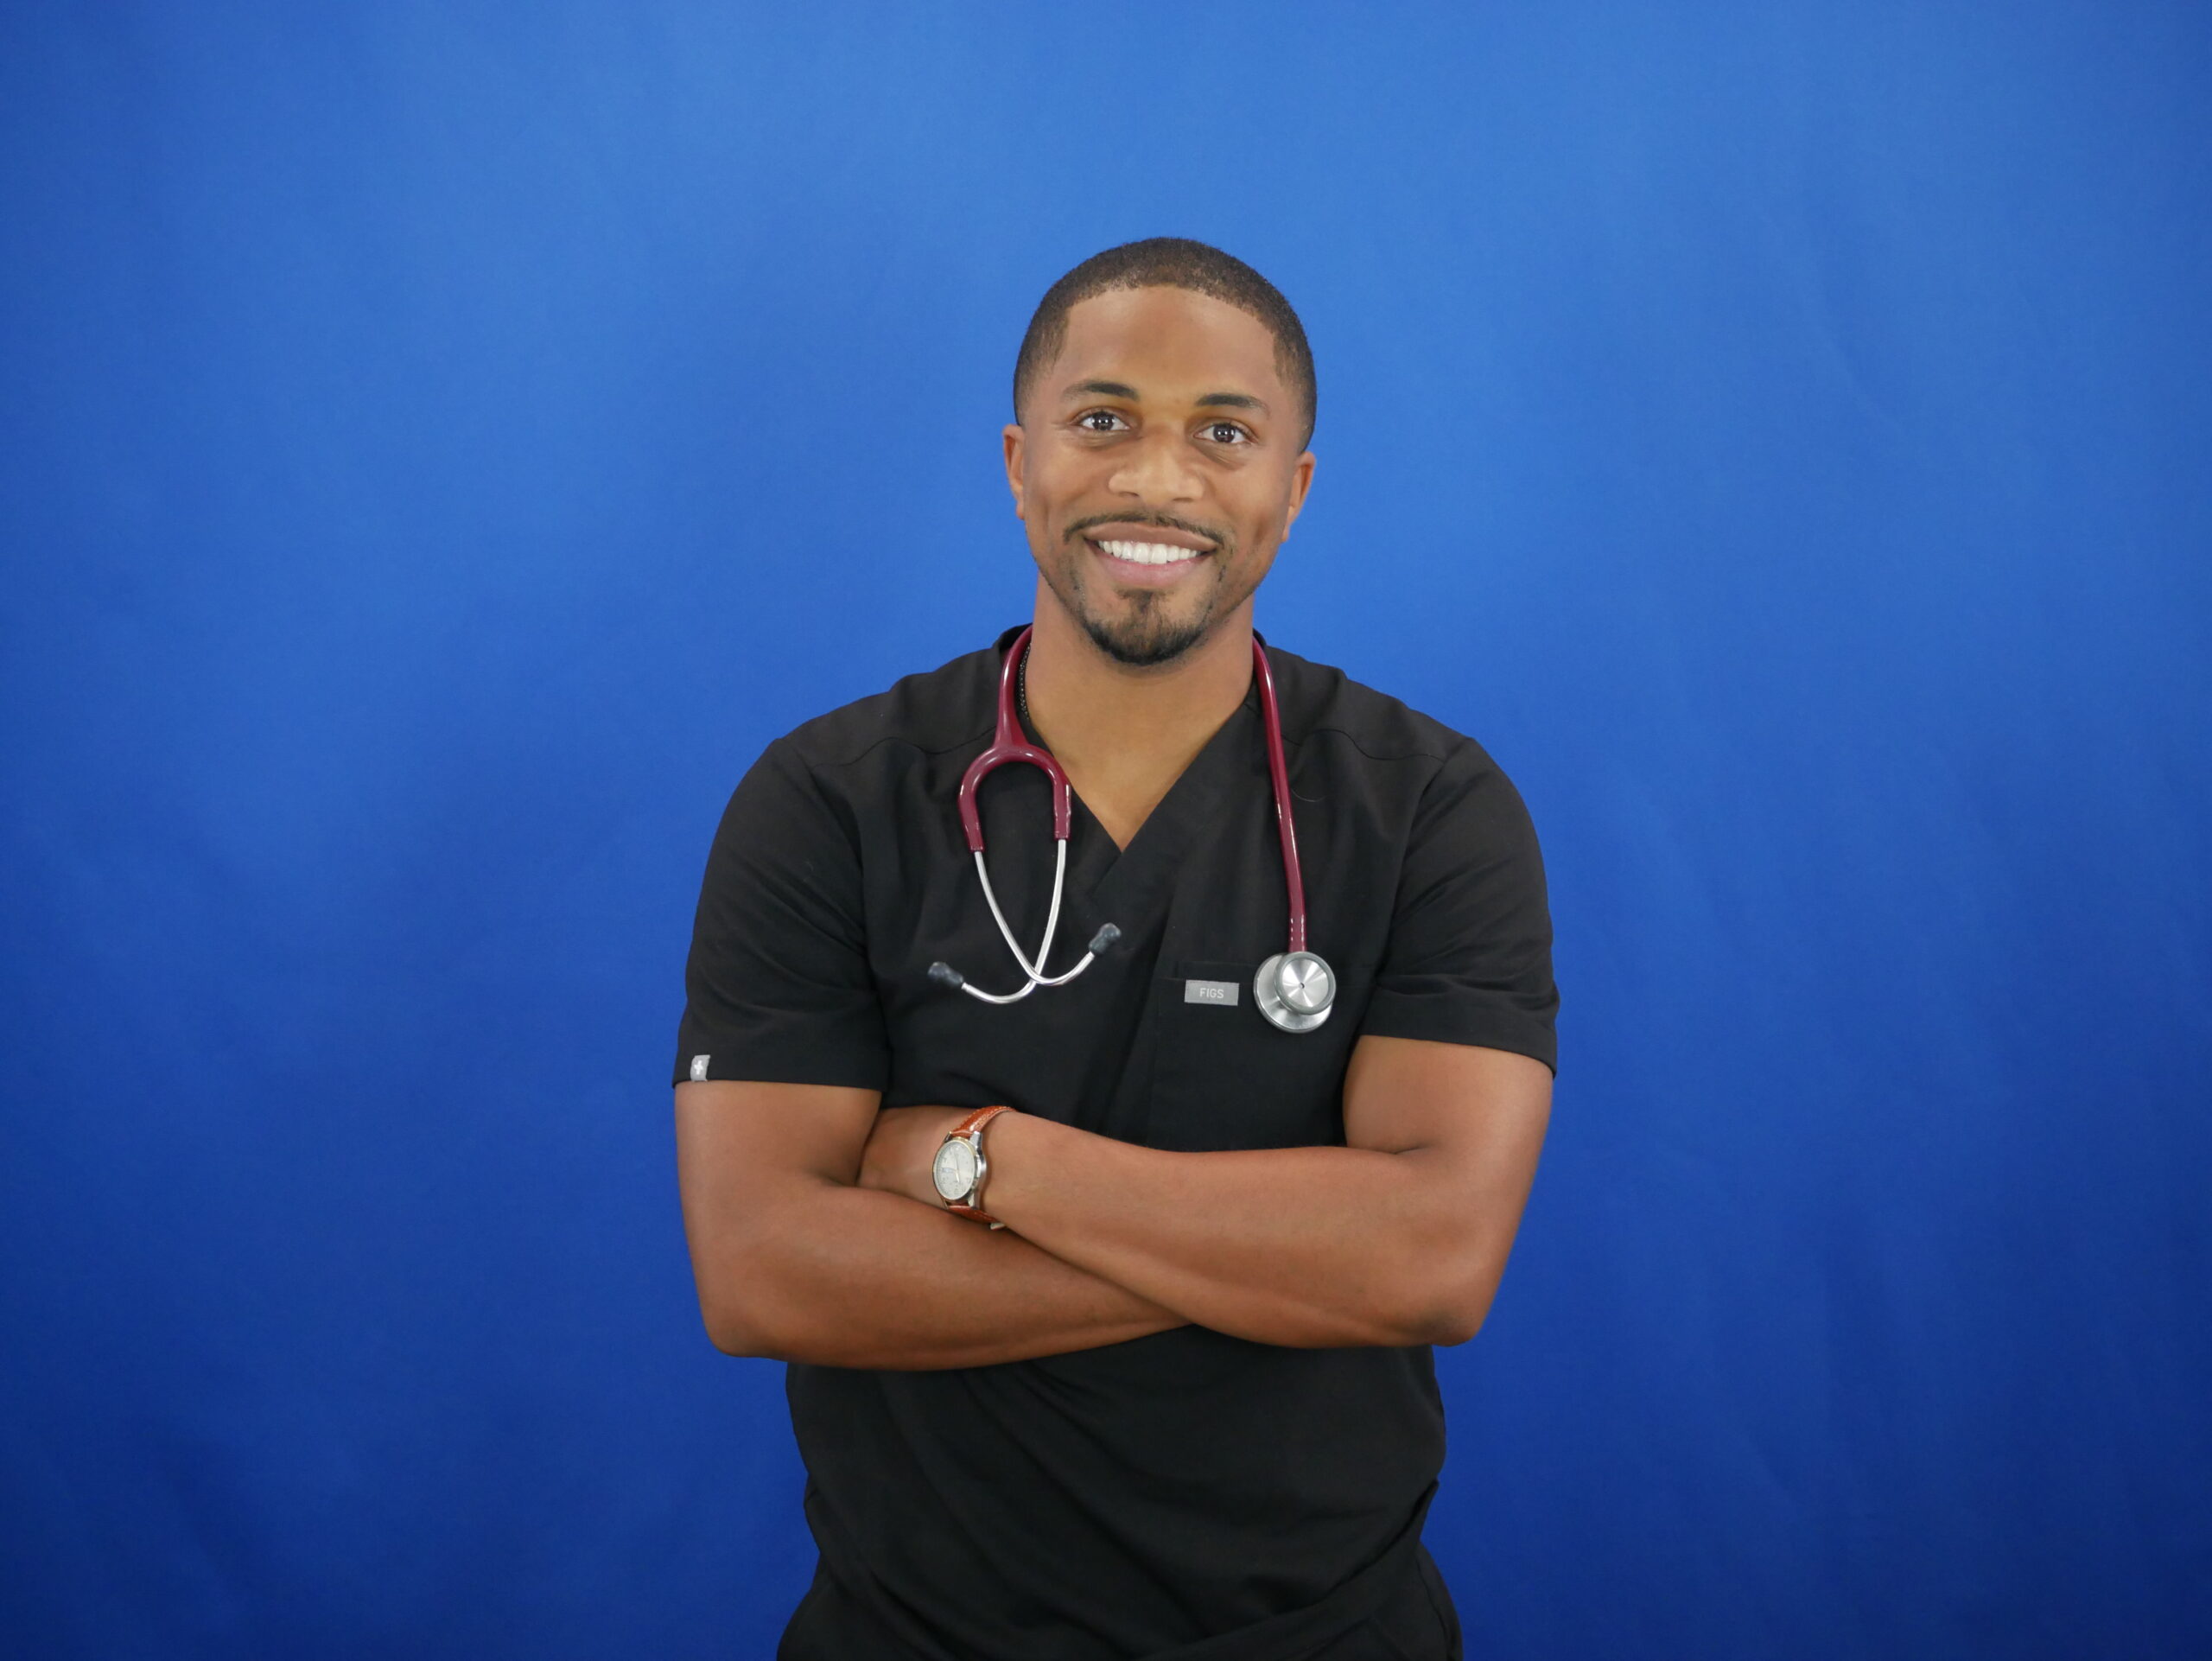 Small animal veterinarian Dr. Quincy Hawley stands with his arms crossed in front of a blue background.